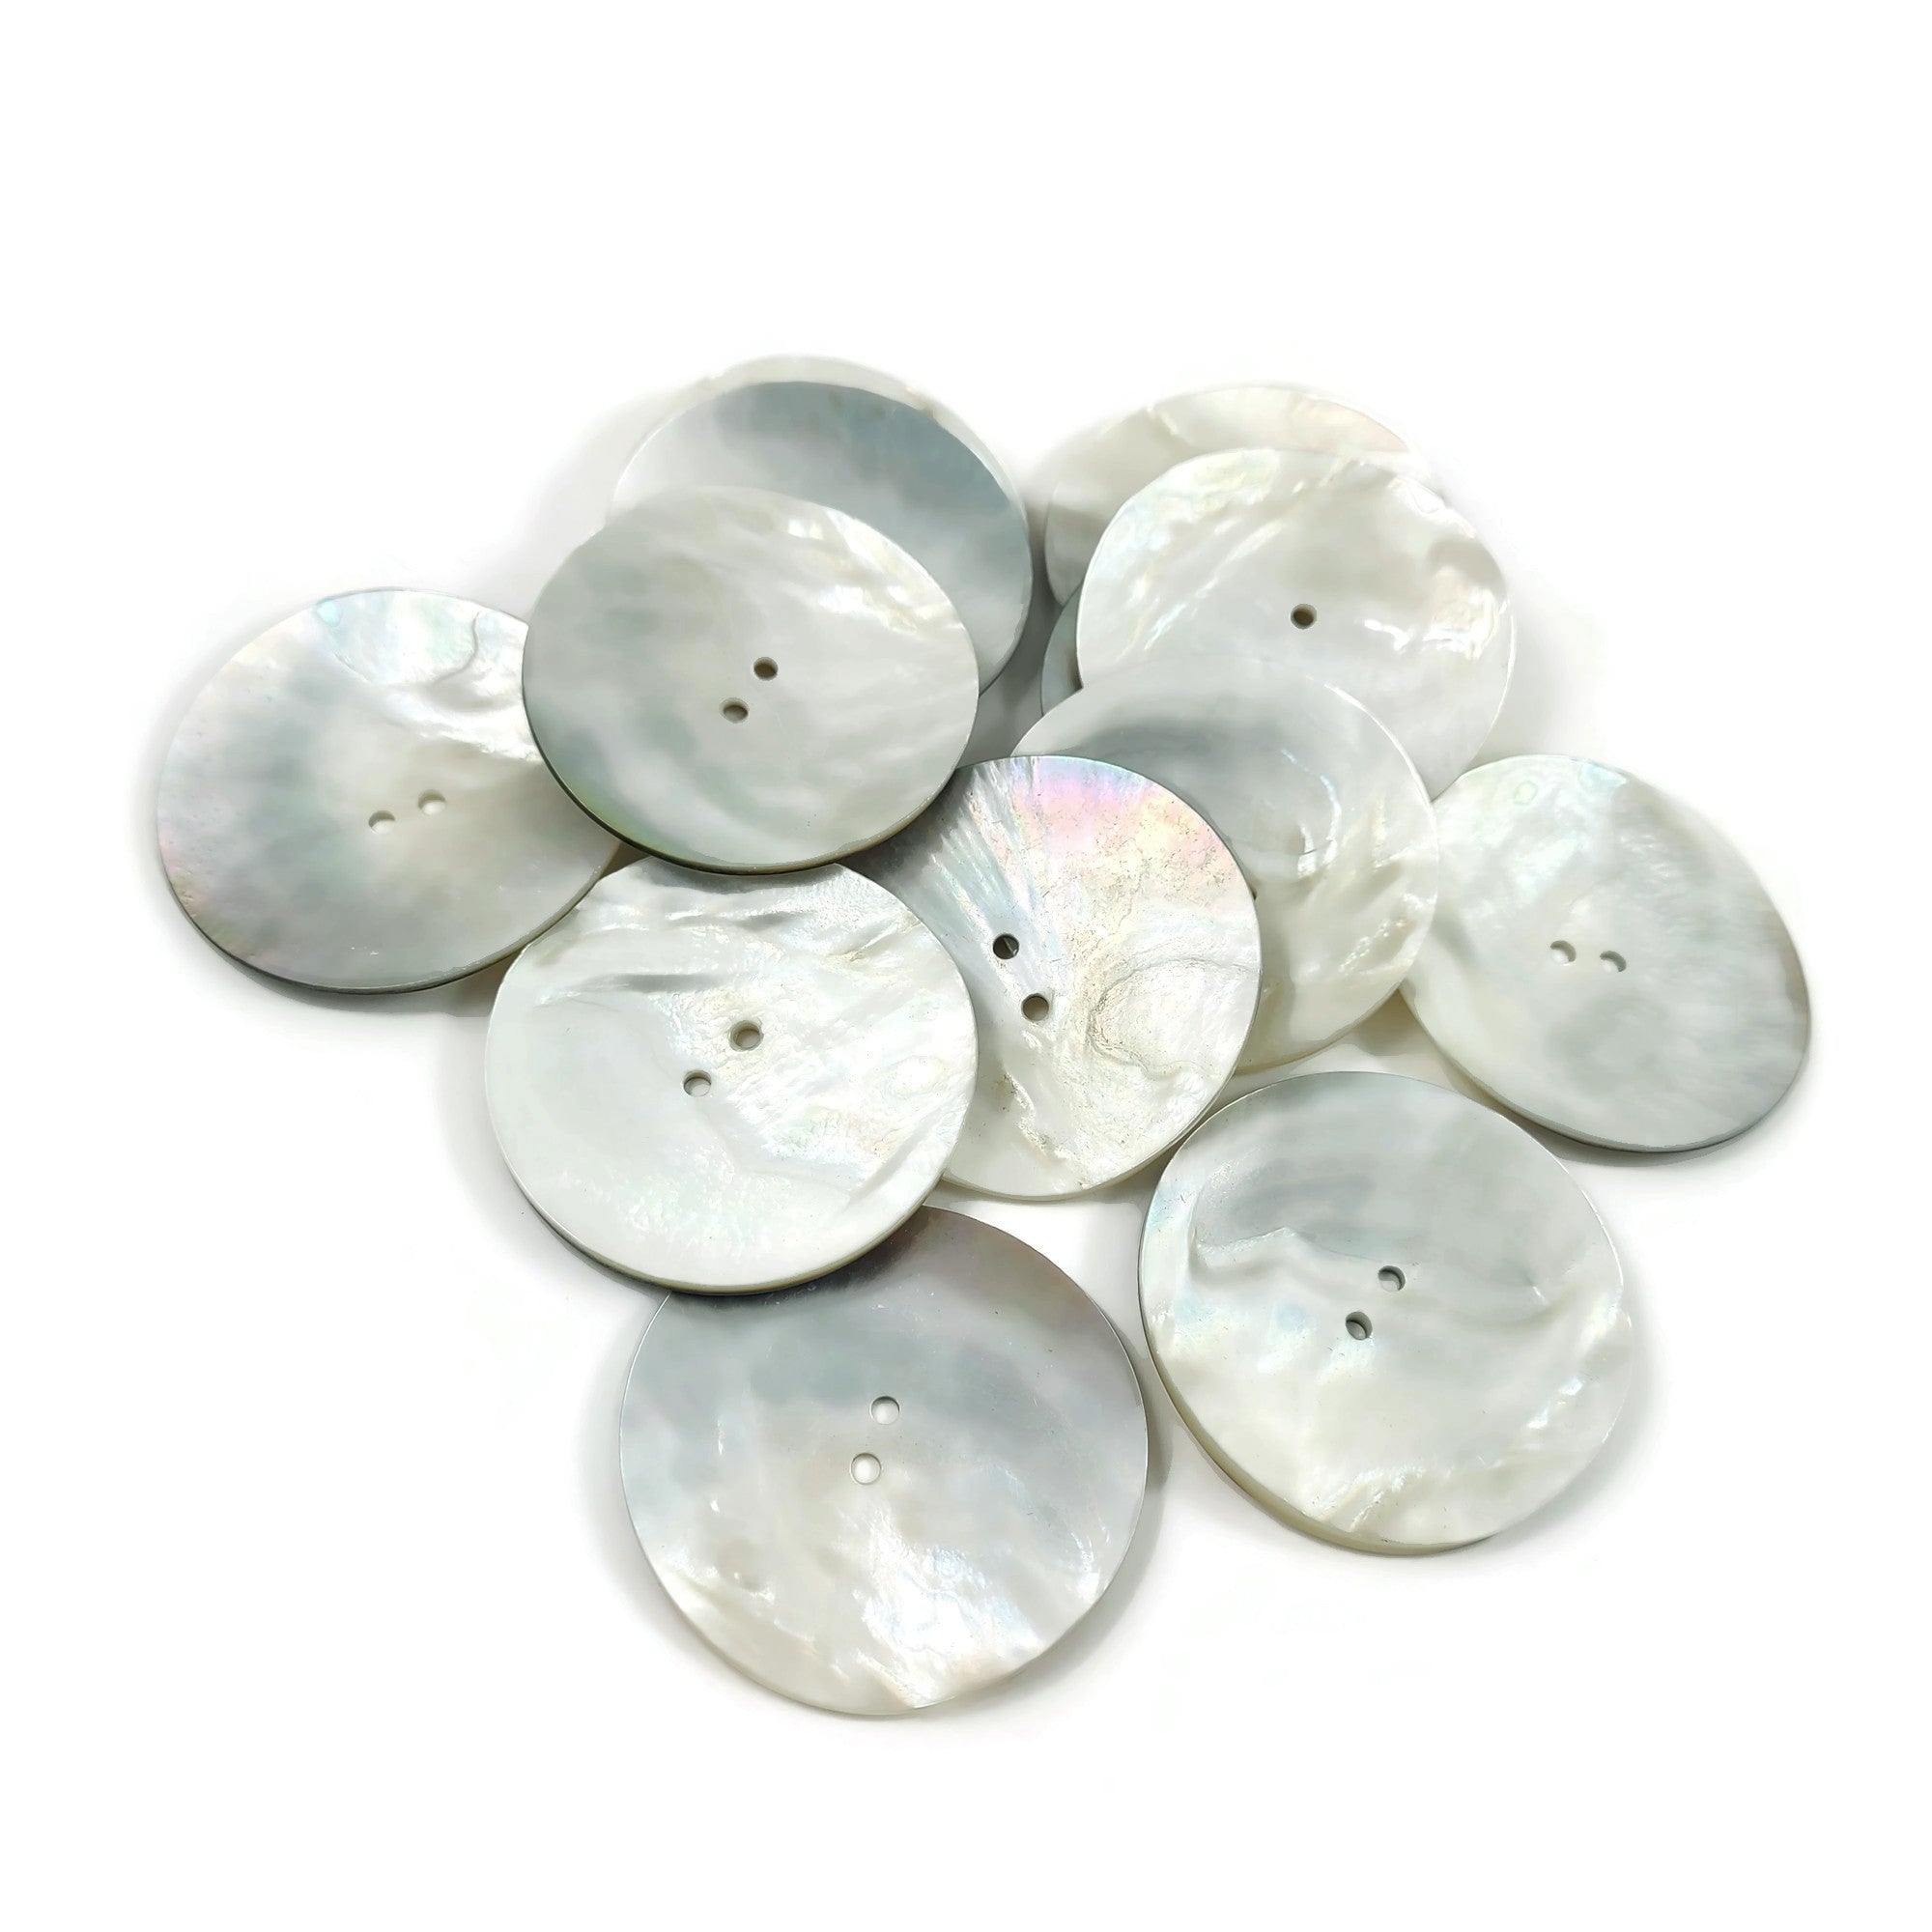 SEWACC 20pcs Pearl Buttons Sweater Button Pearl Button for Sewing Crafting  Buttons Pearl Charm for DIY Artificial Pearl Button Sewing Buttons Delicate